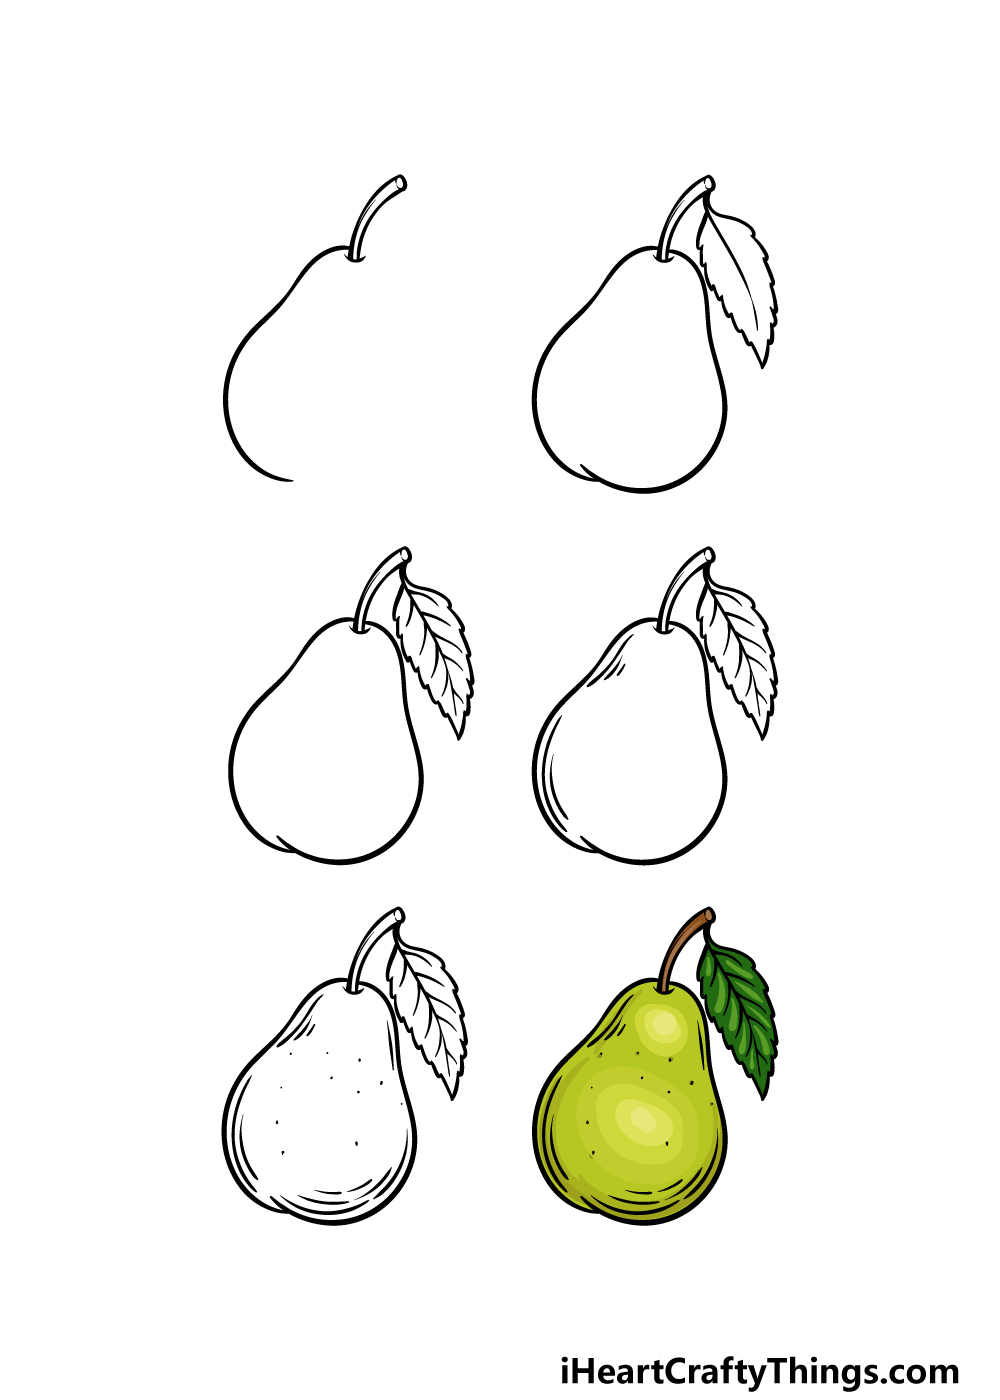 How to Draw A Pear in 6 easy steps